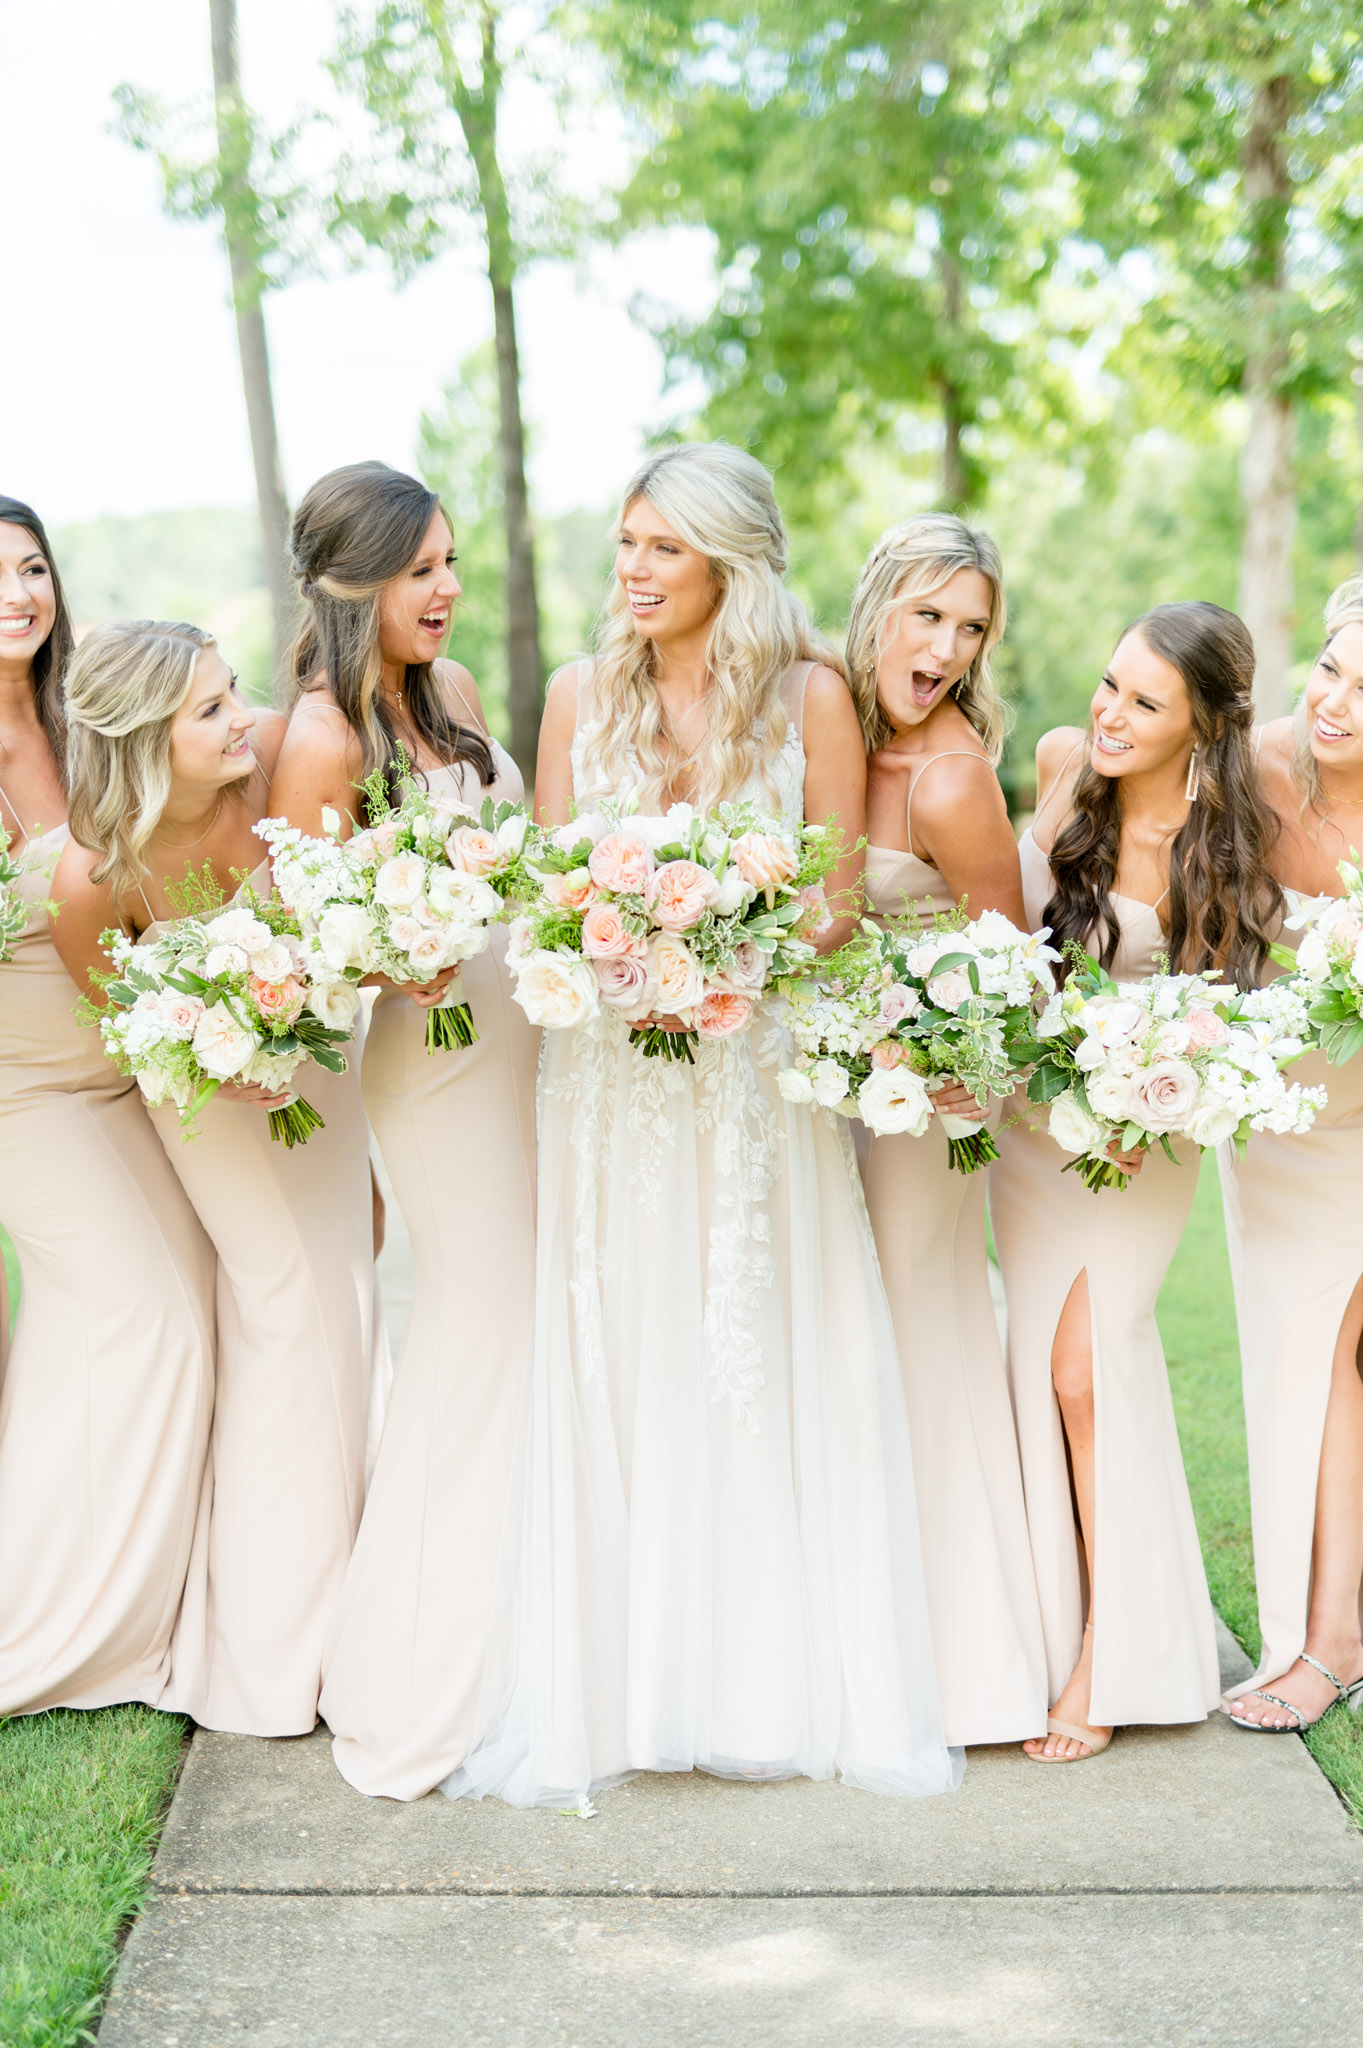 Bride laughs with bridal party.